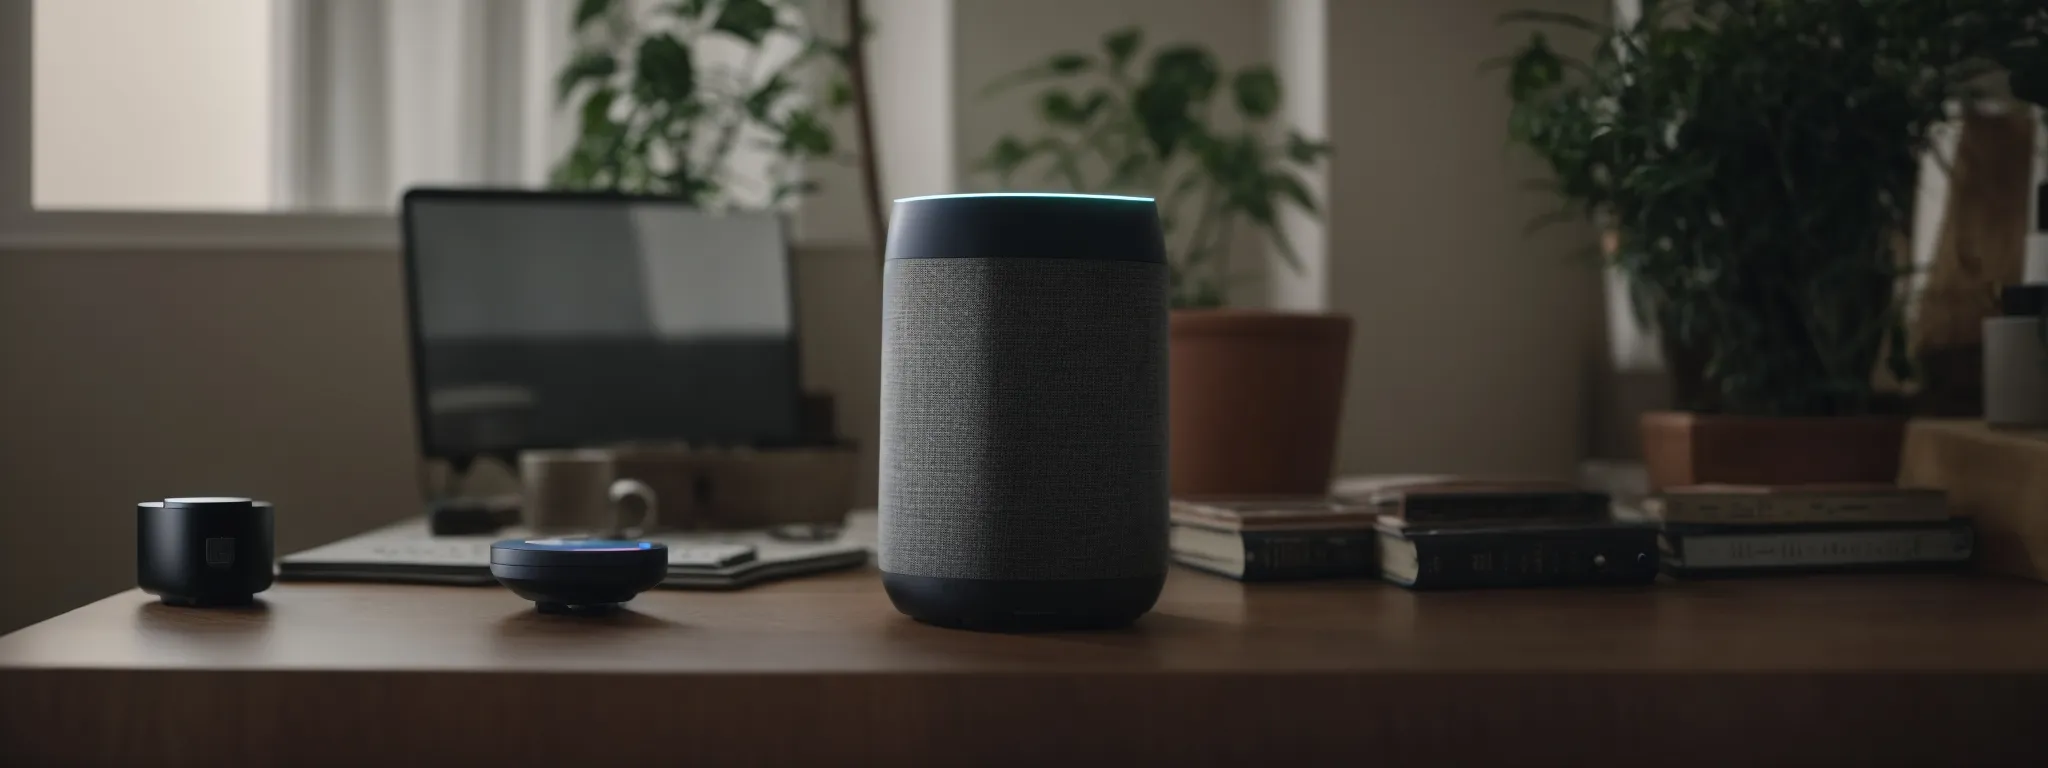 a person speaking into a smart speaker sitting on a desk amidst a serene home-office setup.